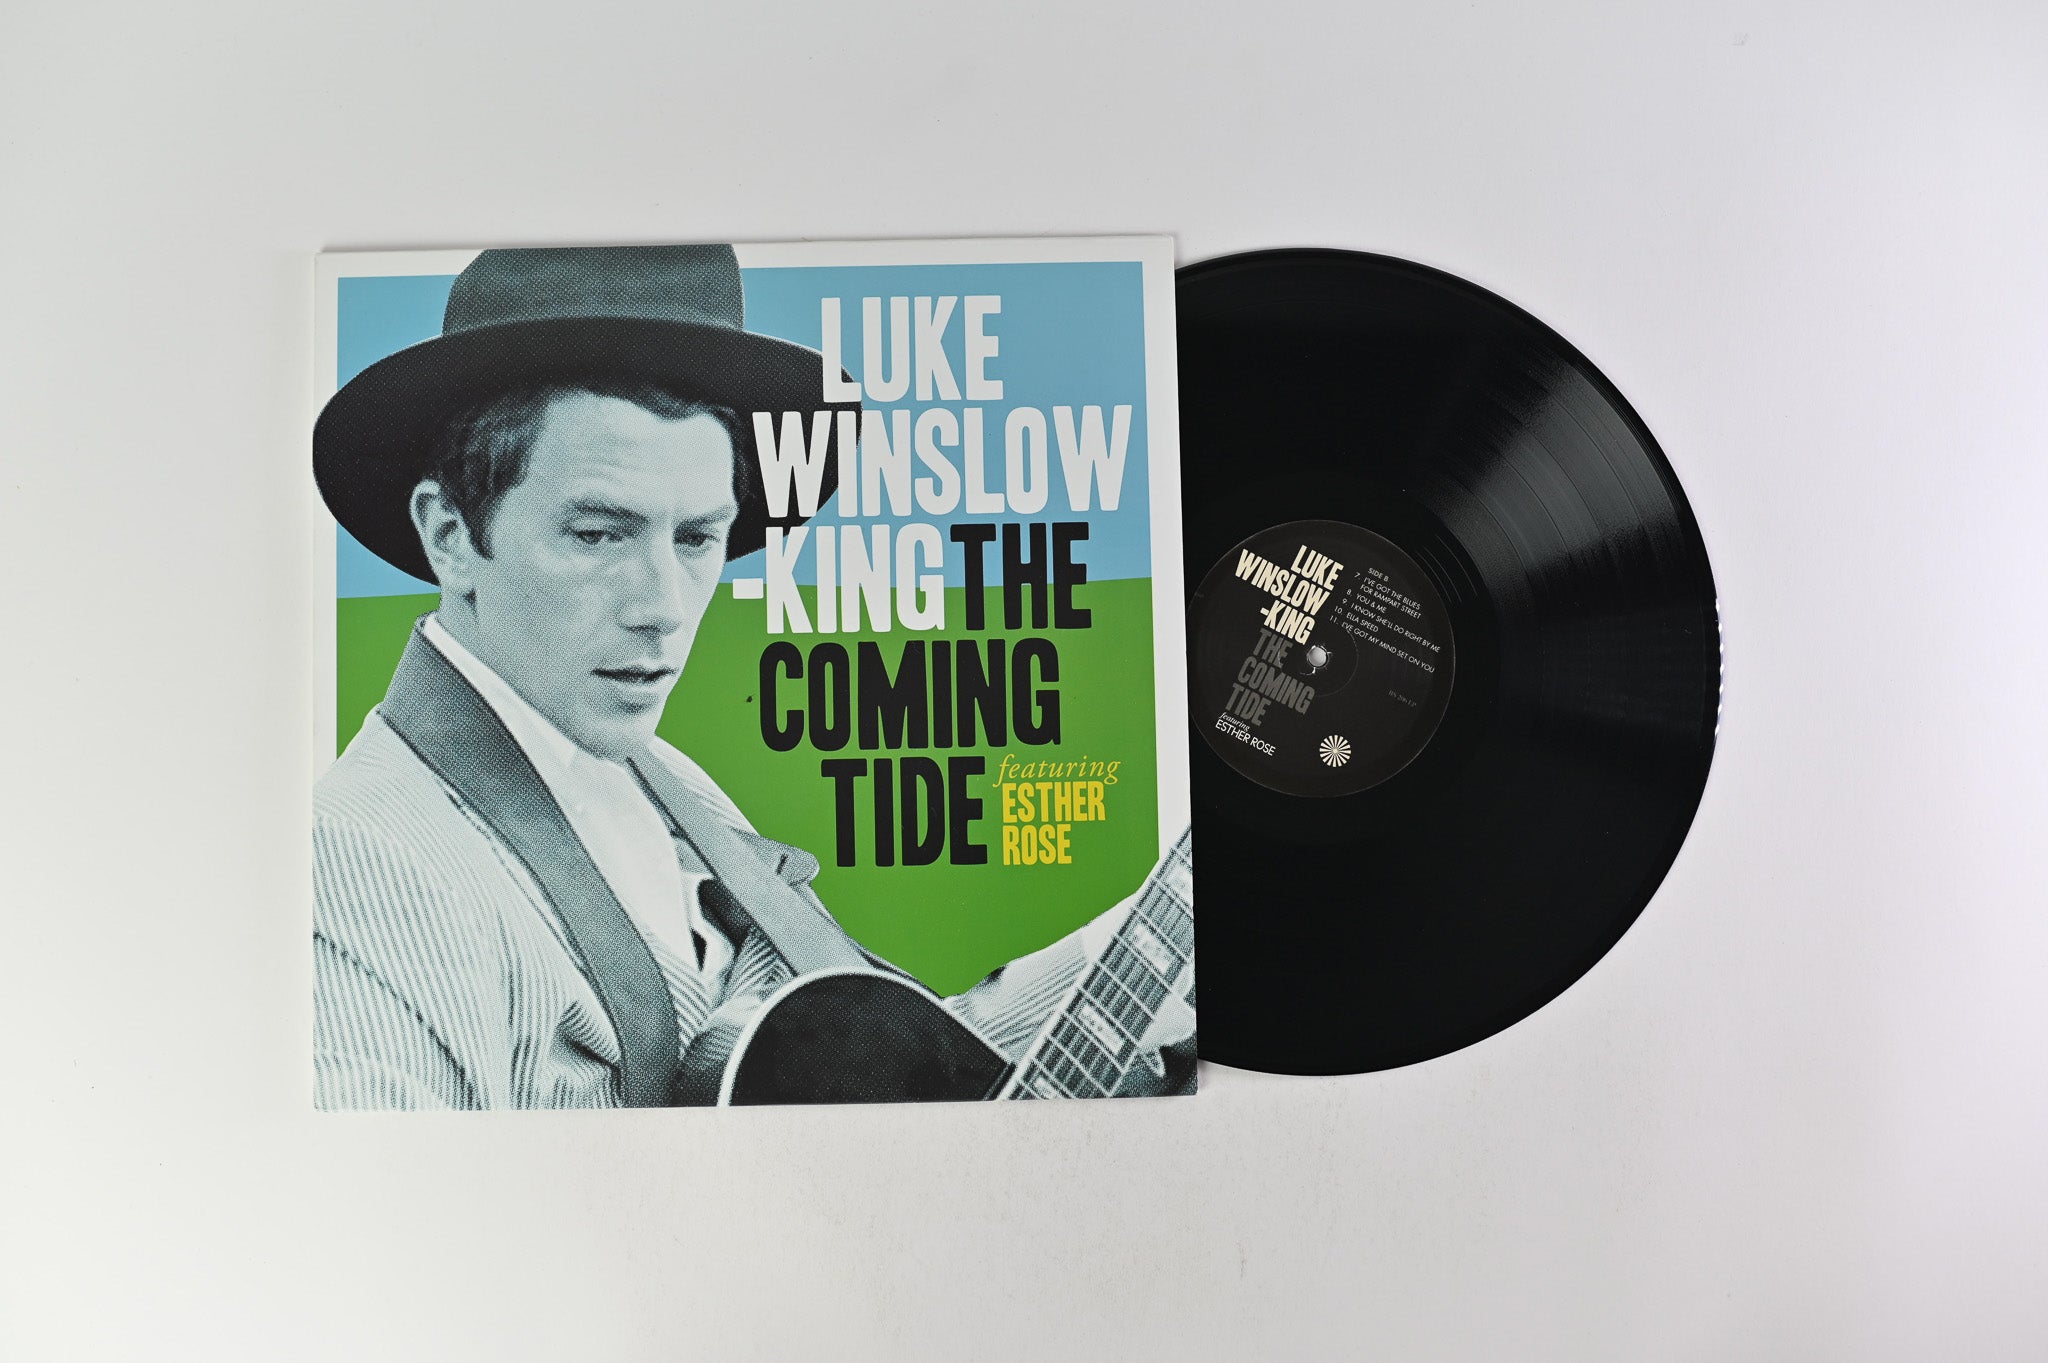 Luke Winslow-King Featuring Esther Rose – The Coming Tide on Bloodshot Records